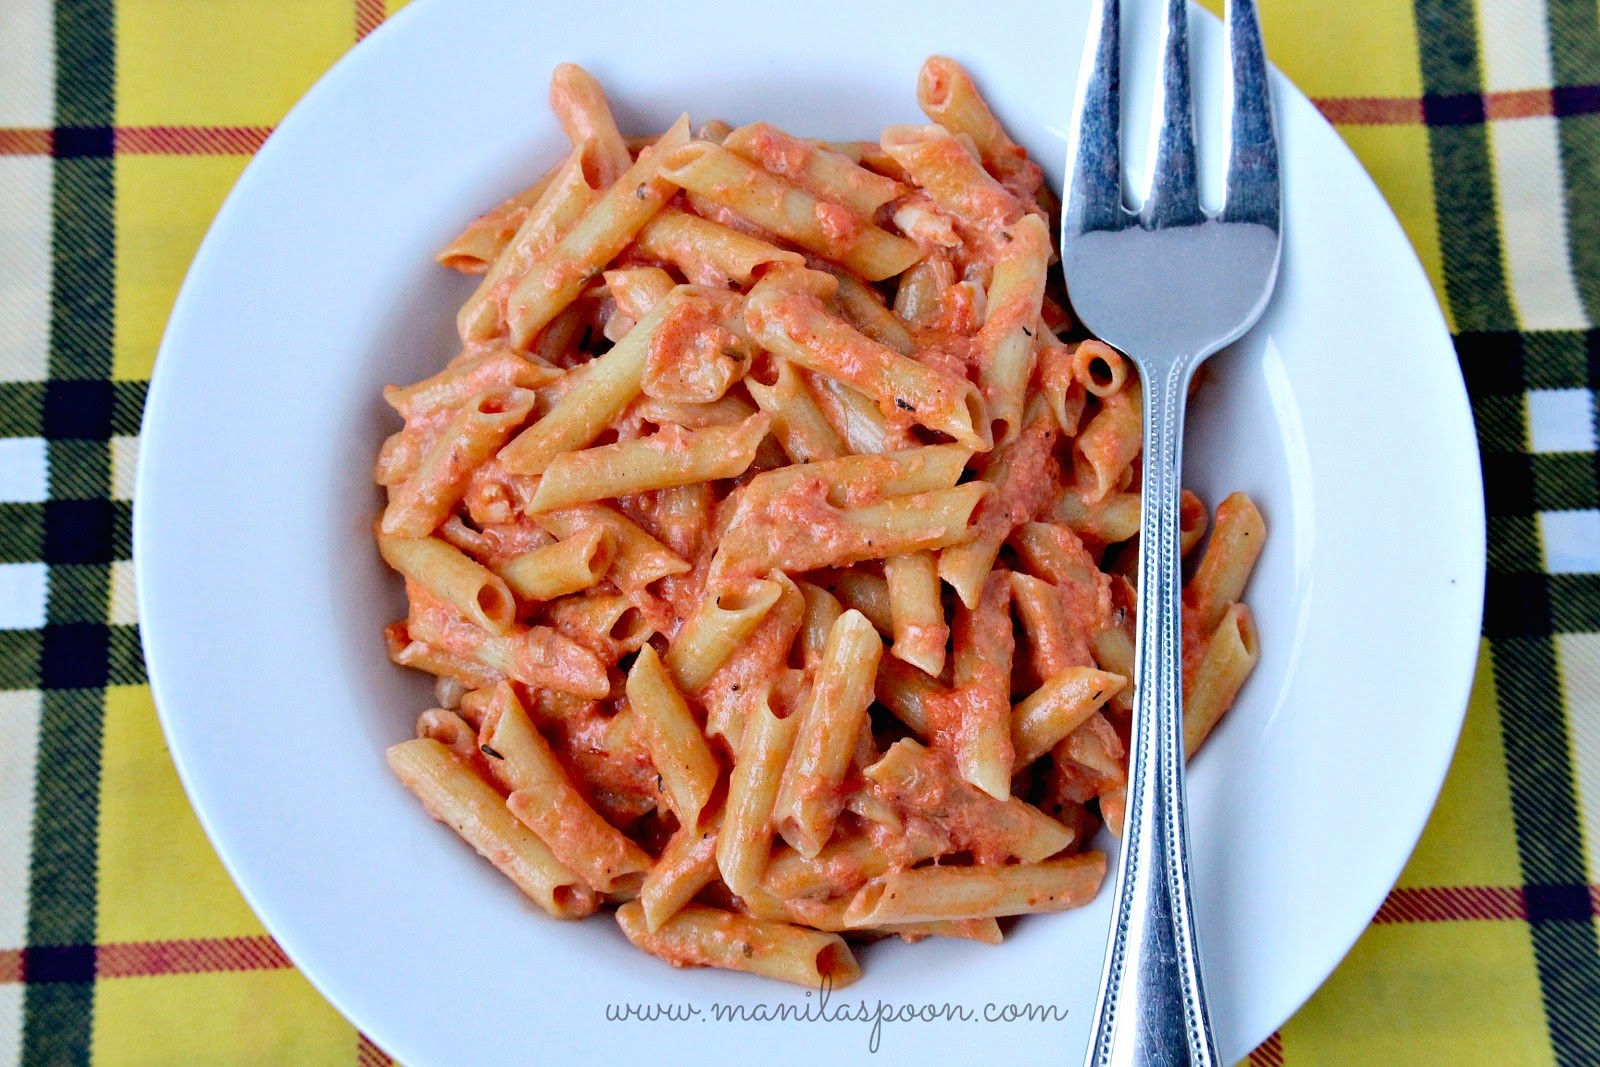 A little spicy, creamy and loaded with flavor is this easy pasta dish for weeknight family dinner - Pasta with Tuna in Creamy Tomato Sauce #pasta #tuna #tunapasta #tomato #sauce